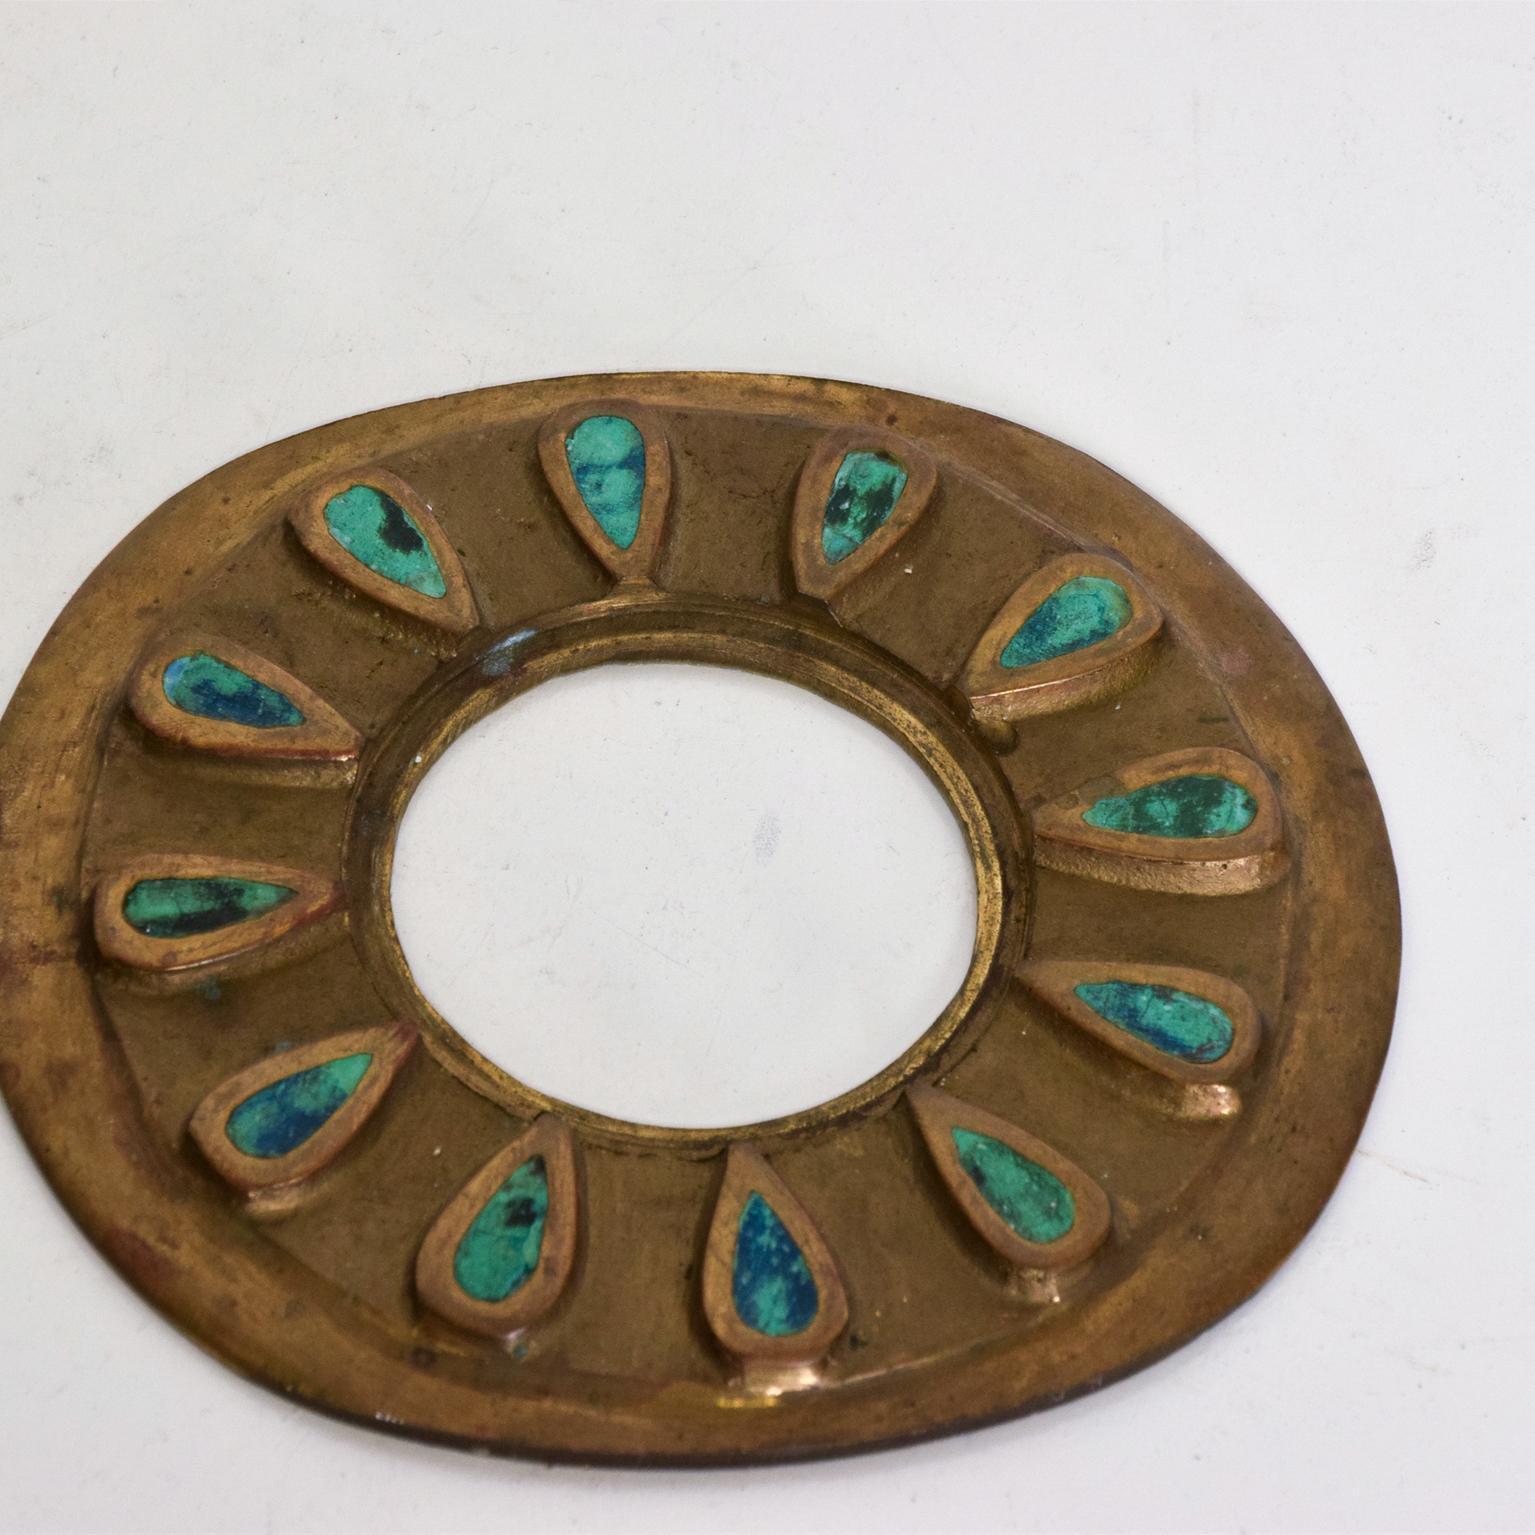 For your consideration, a Pepe Mendoza door knob decorations Mid Century Mexican Modernist. Listing is for a pair, made of bast bronze with malachite inserts. Original label present on the back of the sculpture. 

Dimensions: 5 3/8